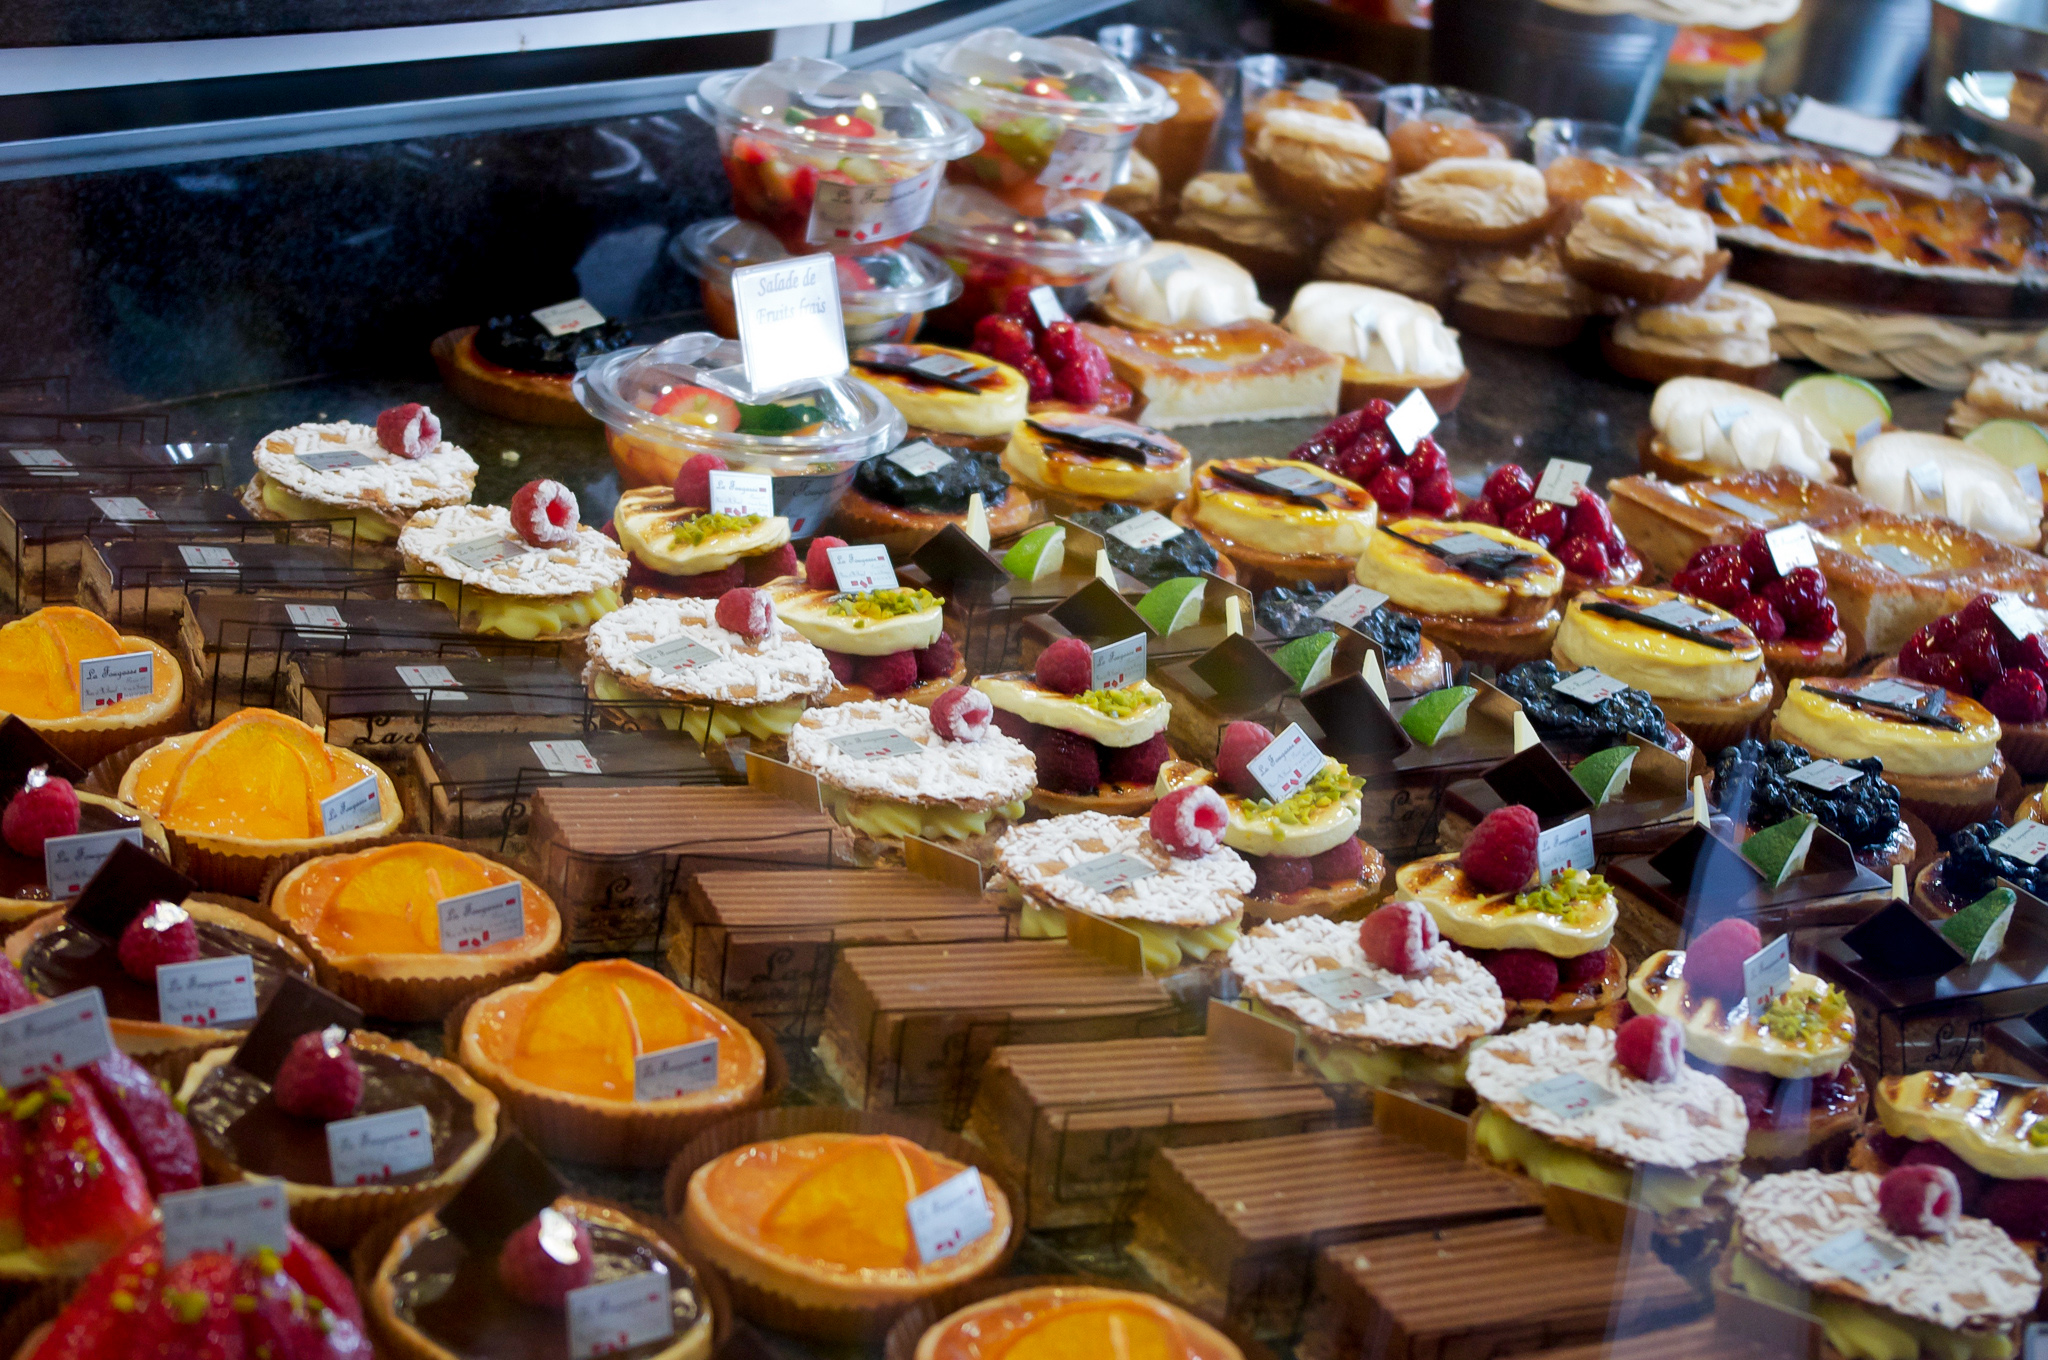 Tart display at La Fougasse in Paris. Photo by alphacityguides.